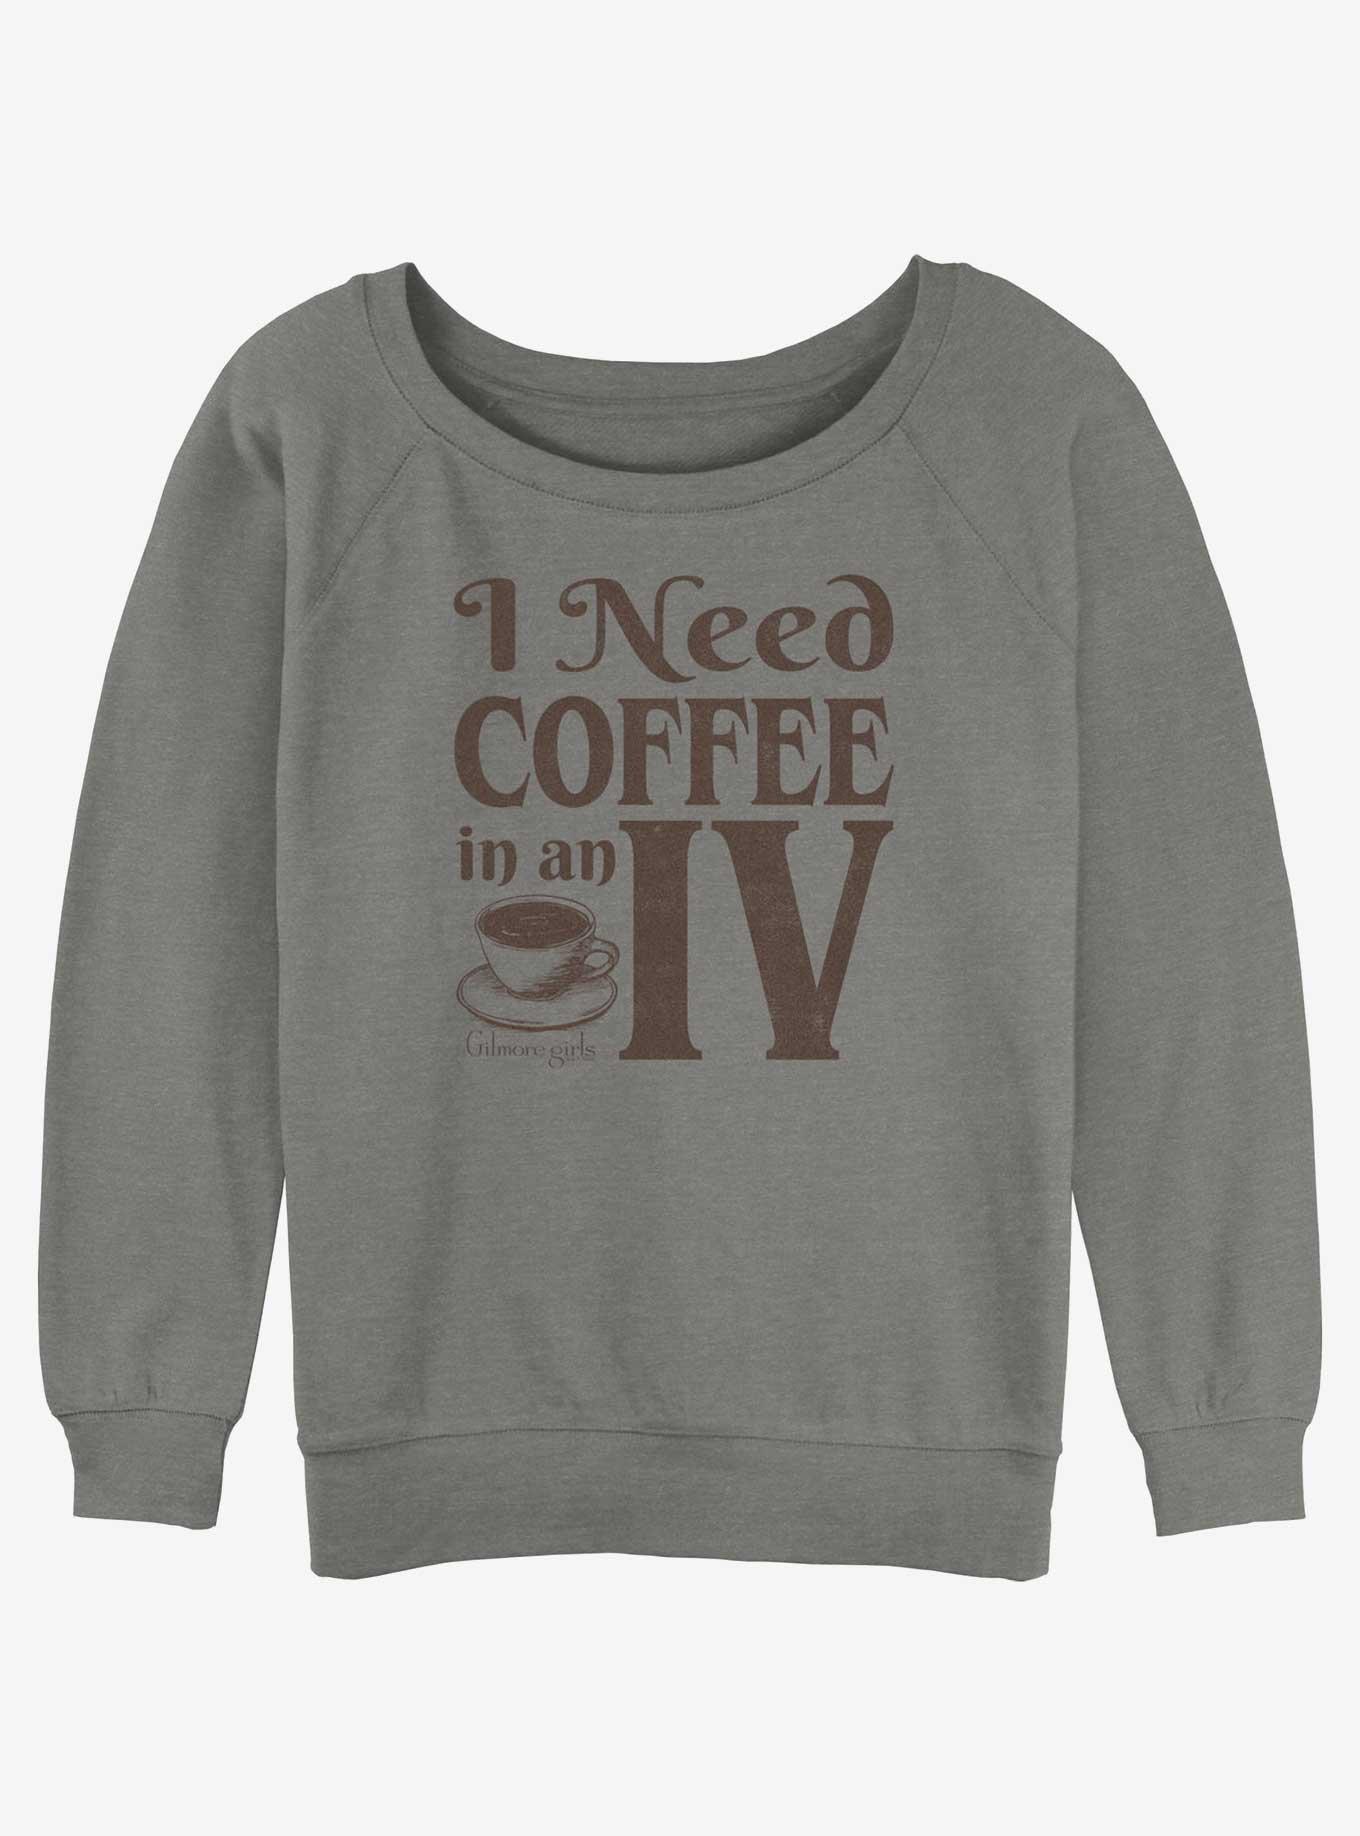 Gilmore Girls Need Coffee In An IV Womens Slouchy Sweatshirt, GRAY HTR, hi-res